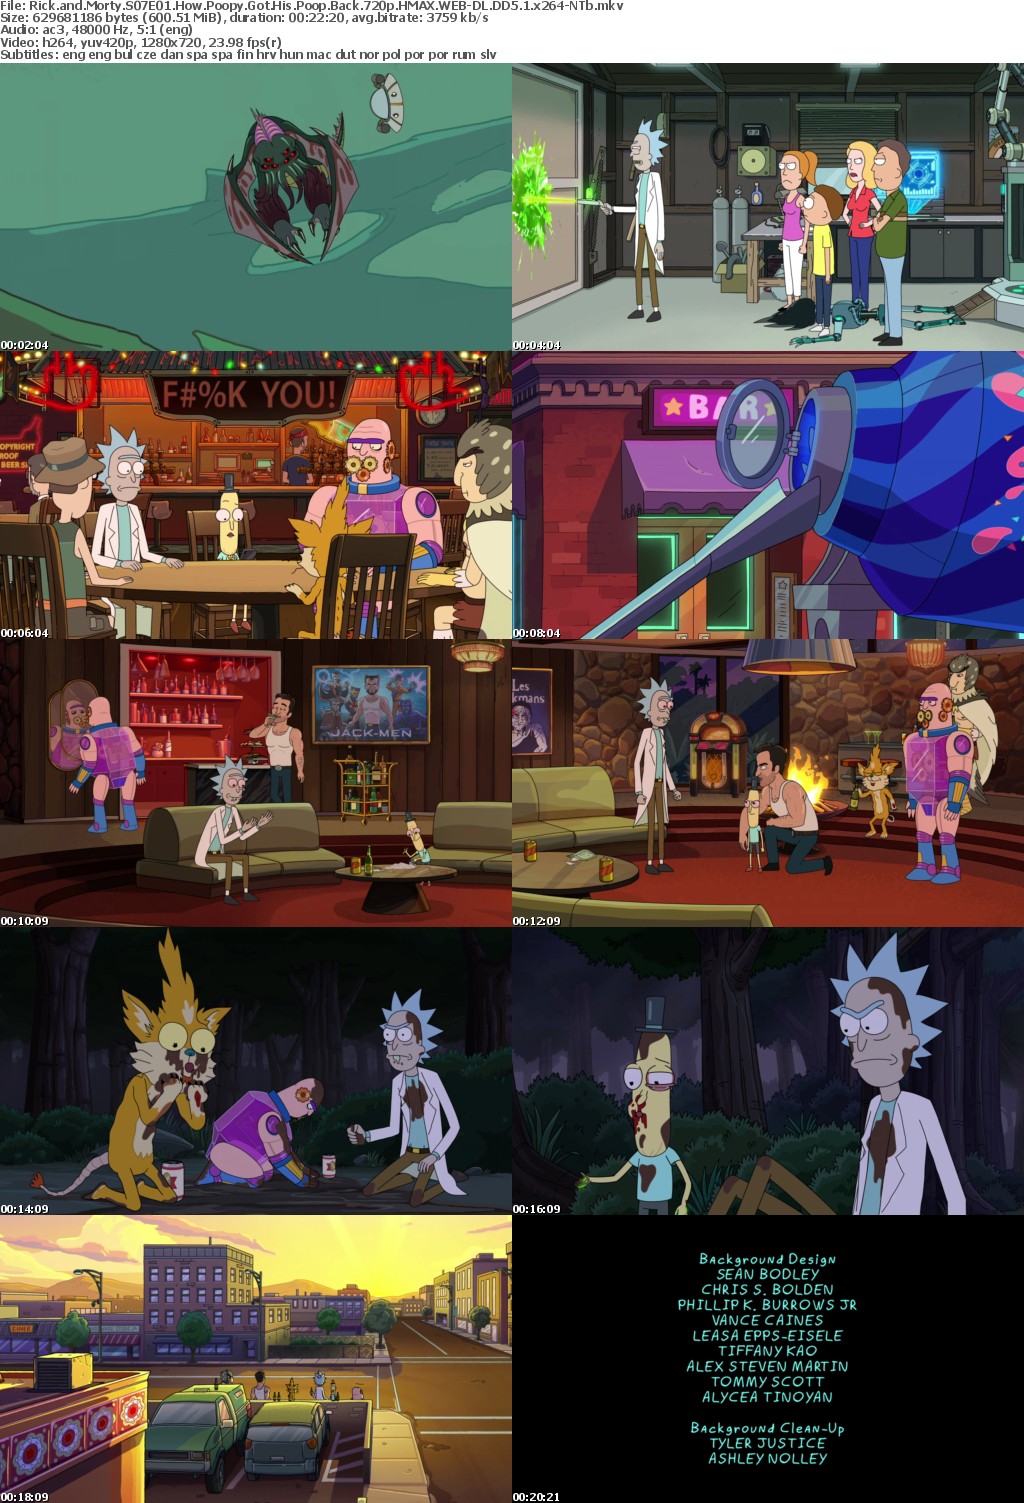 Rick and Morty S07E01 How Poopy Got His Poop Back 720p HMAX WEB-DL DD5 1 x264-NTb